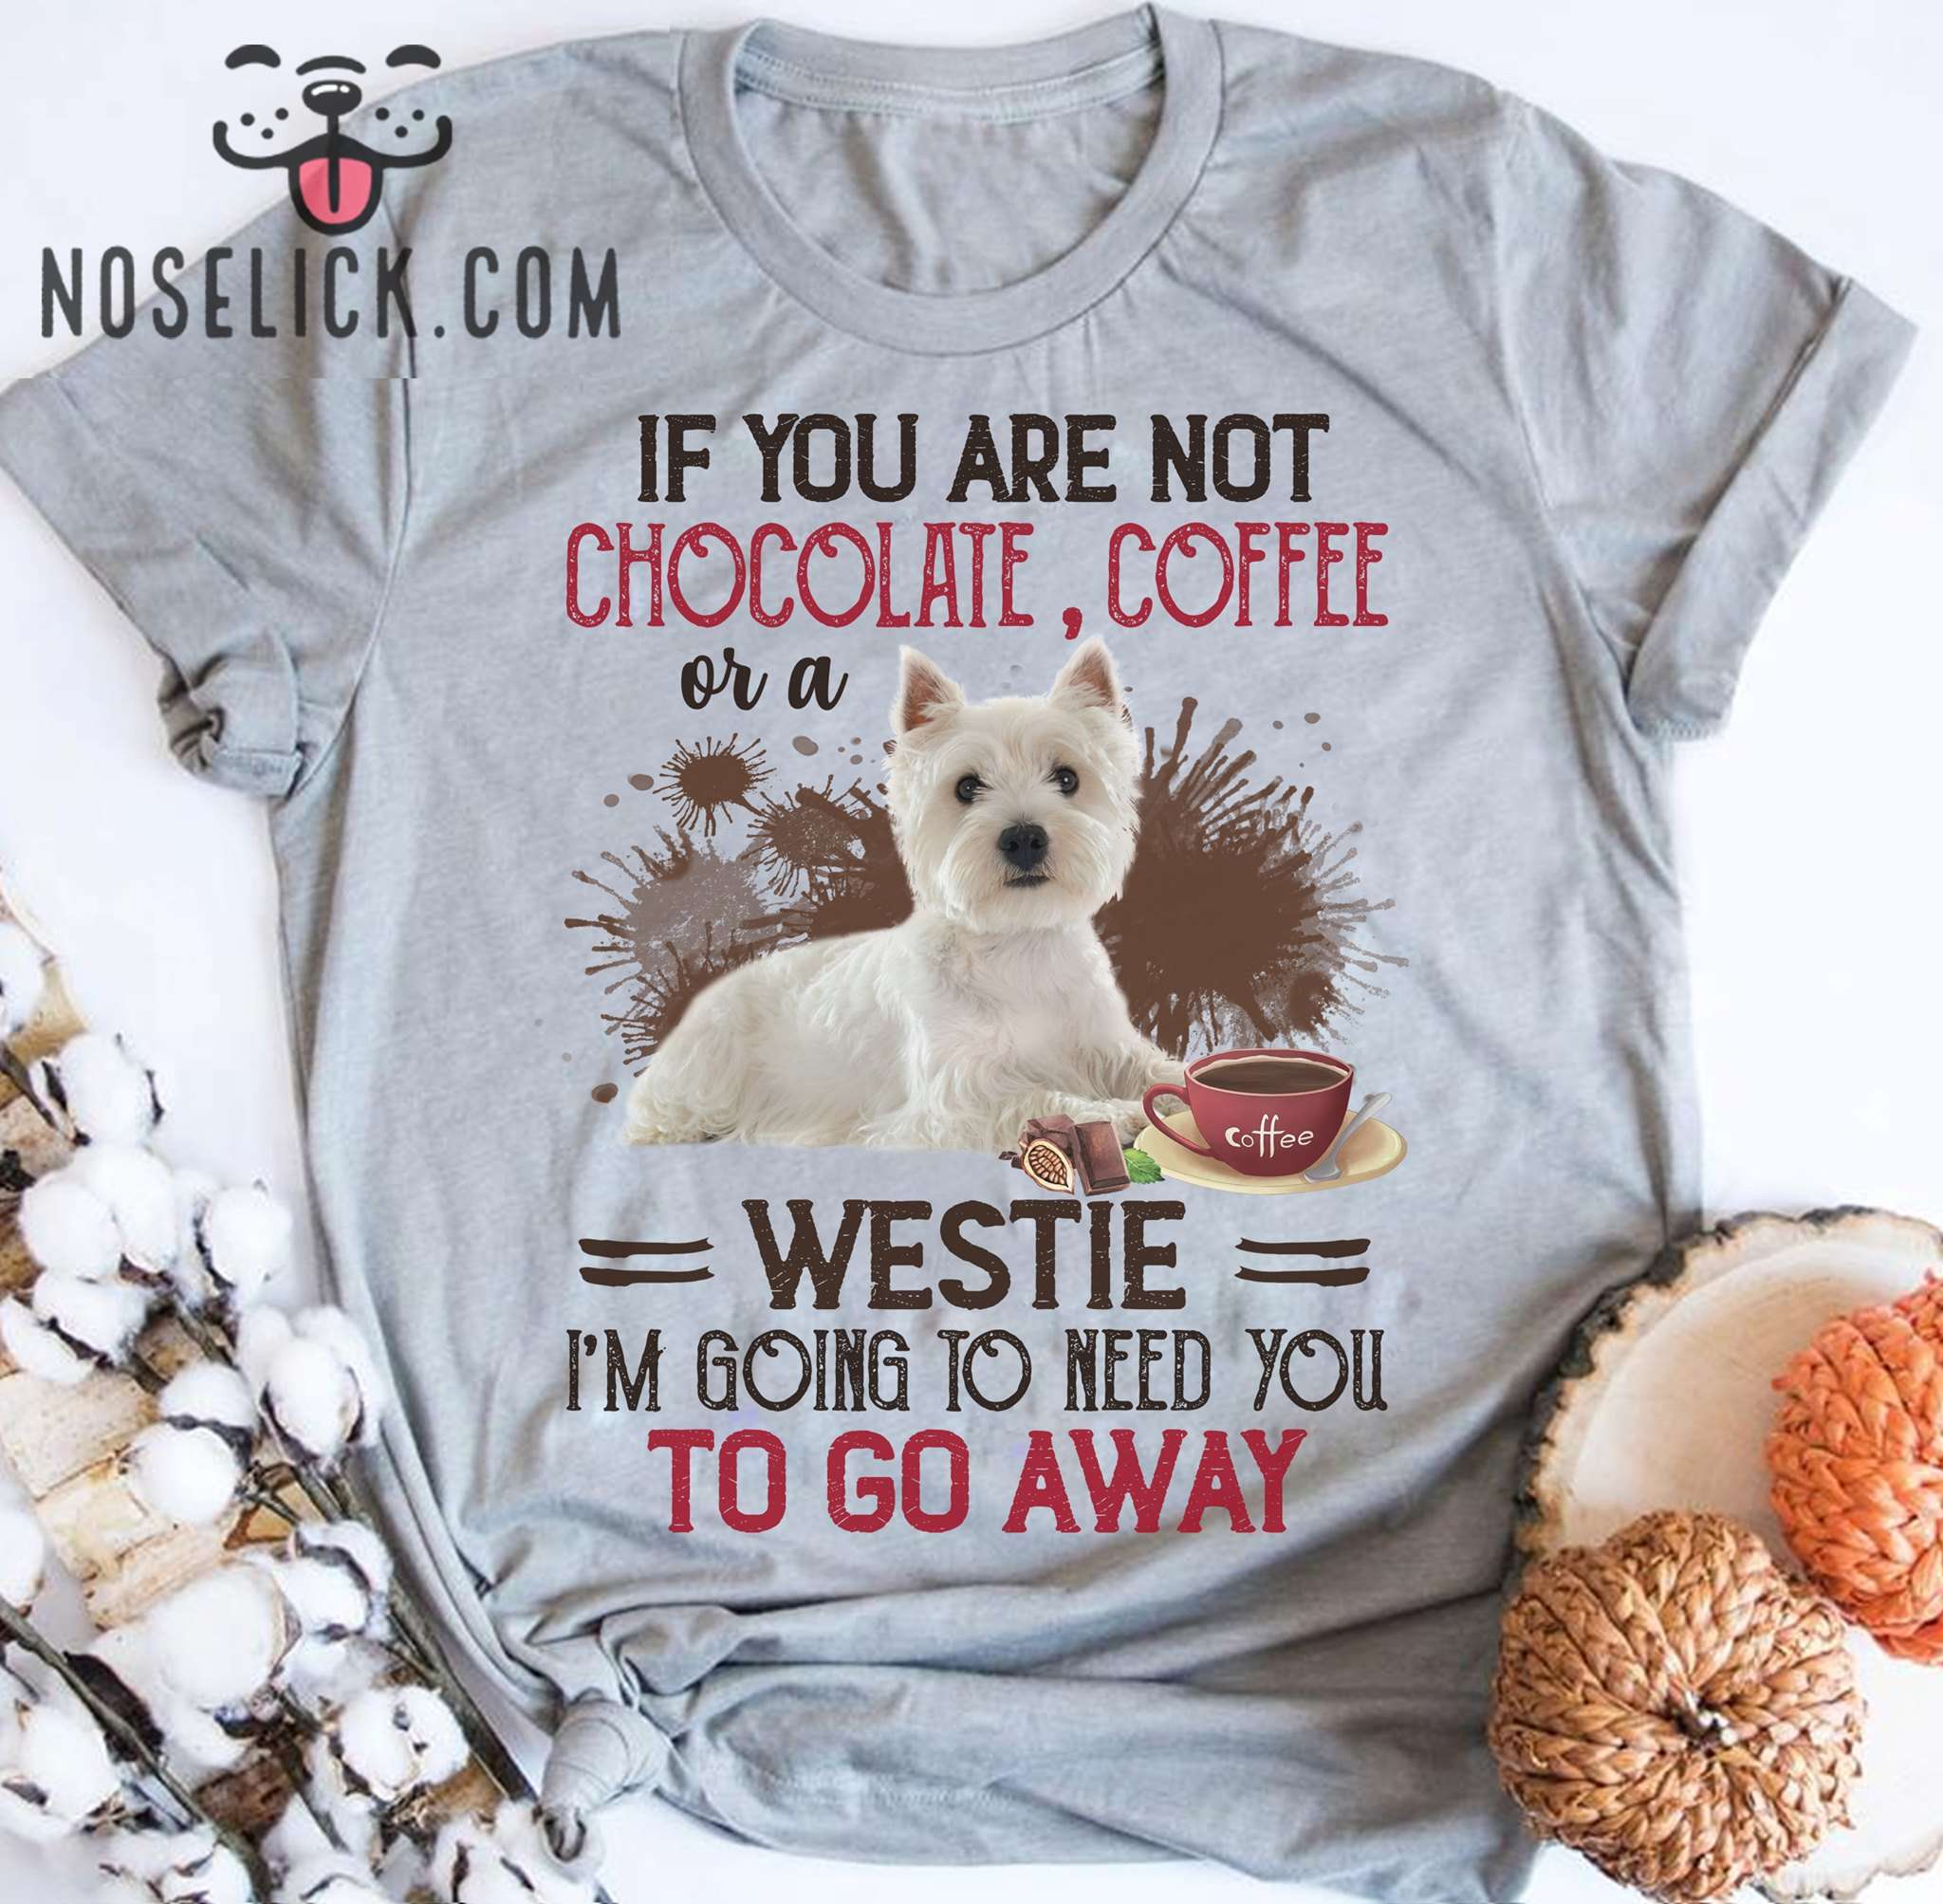 If you are not chocolate, coffee or a Westie I'm going to need you to go away - Chocolate coffee Westie